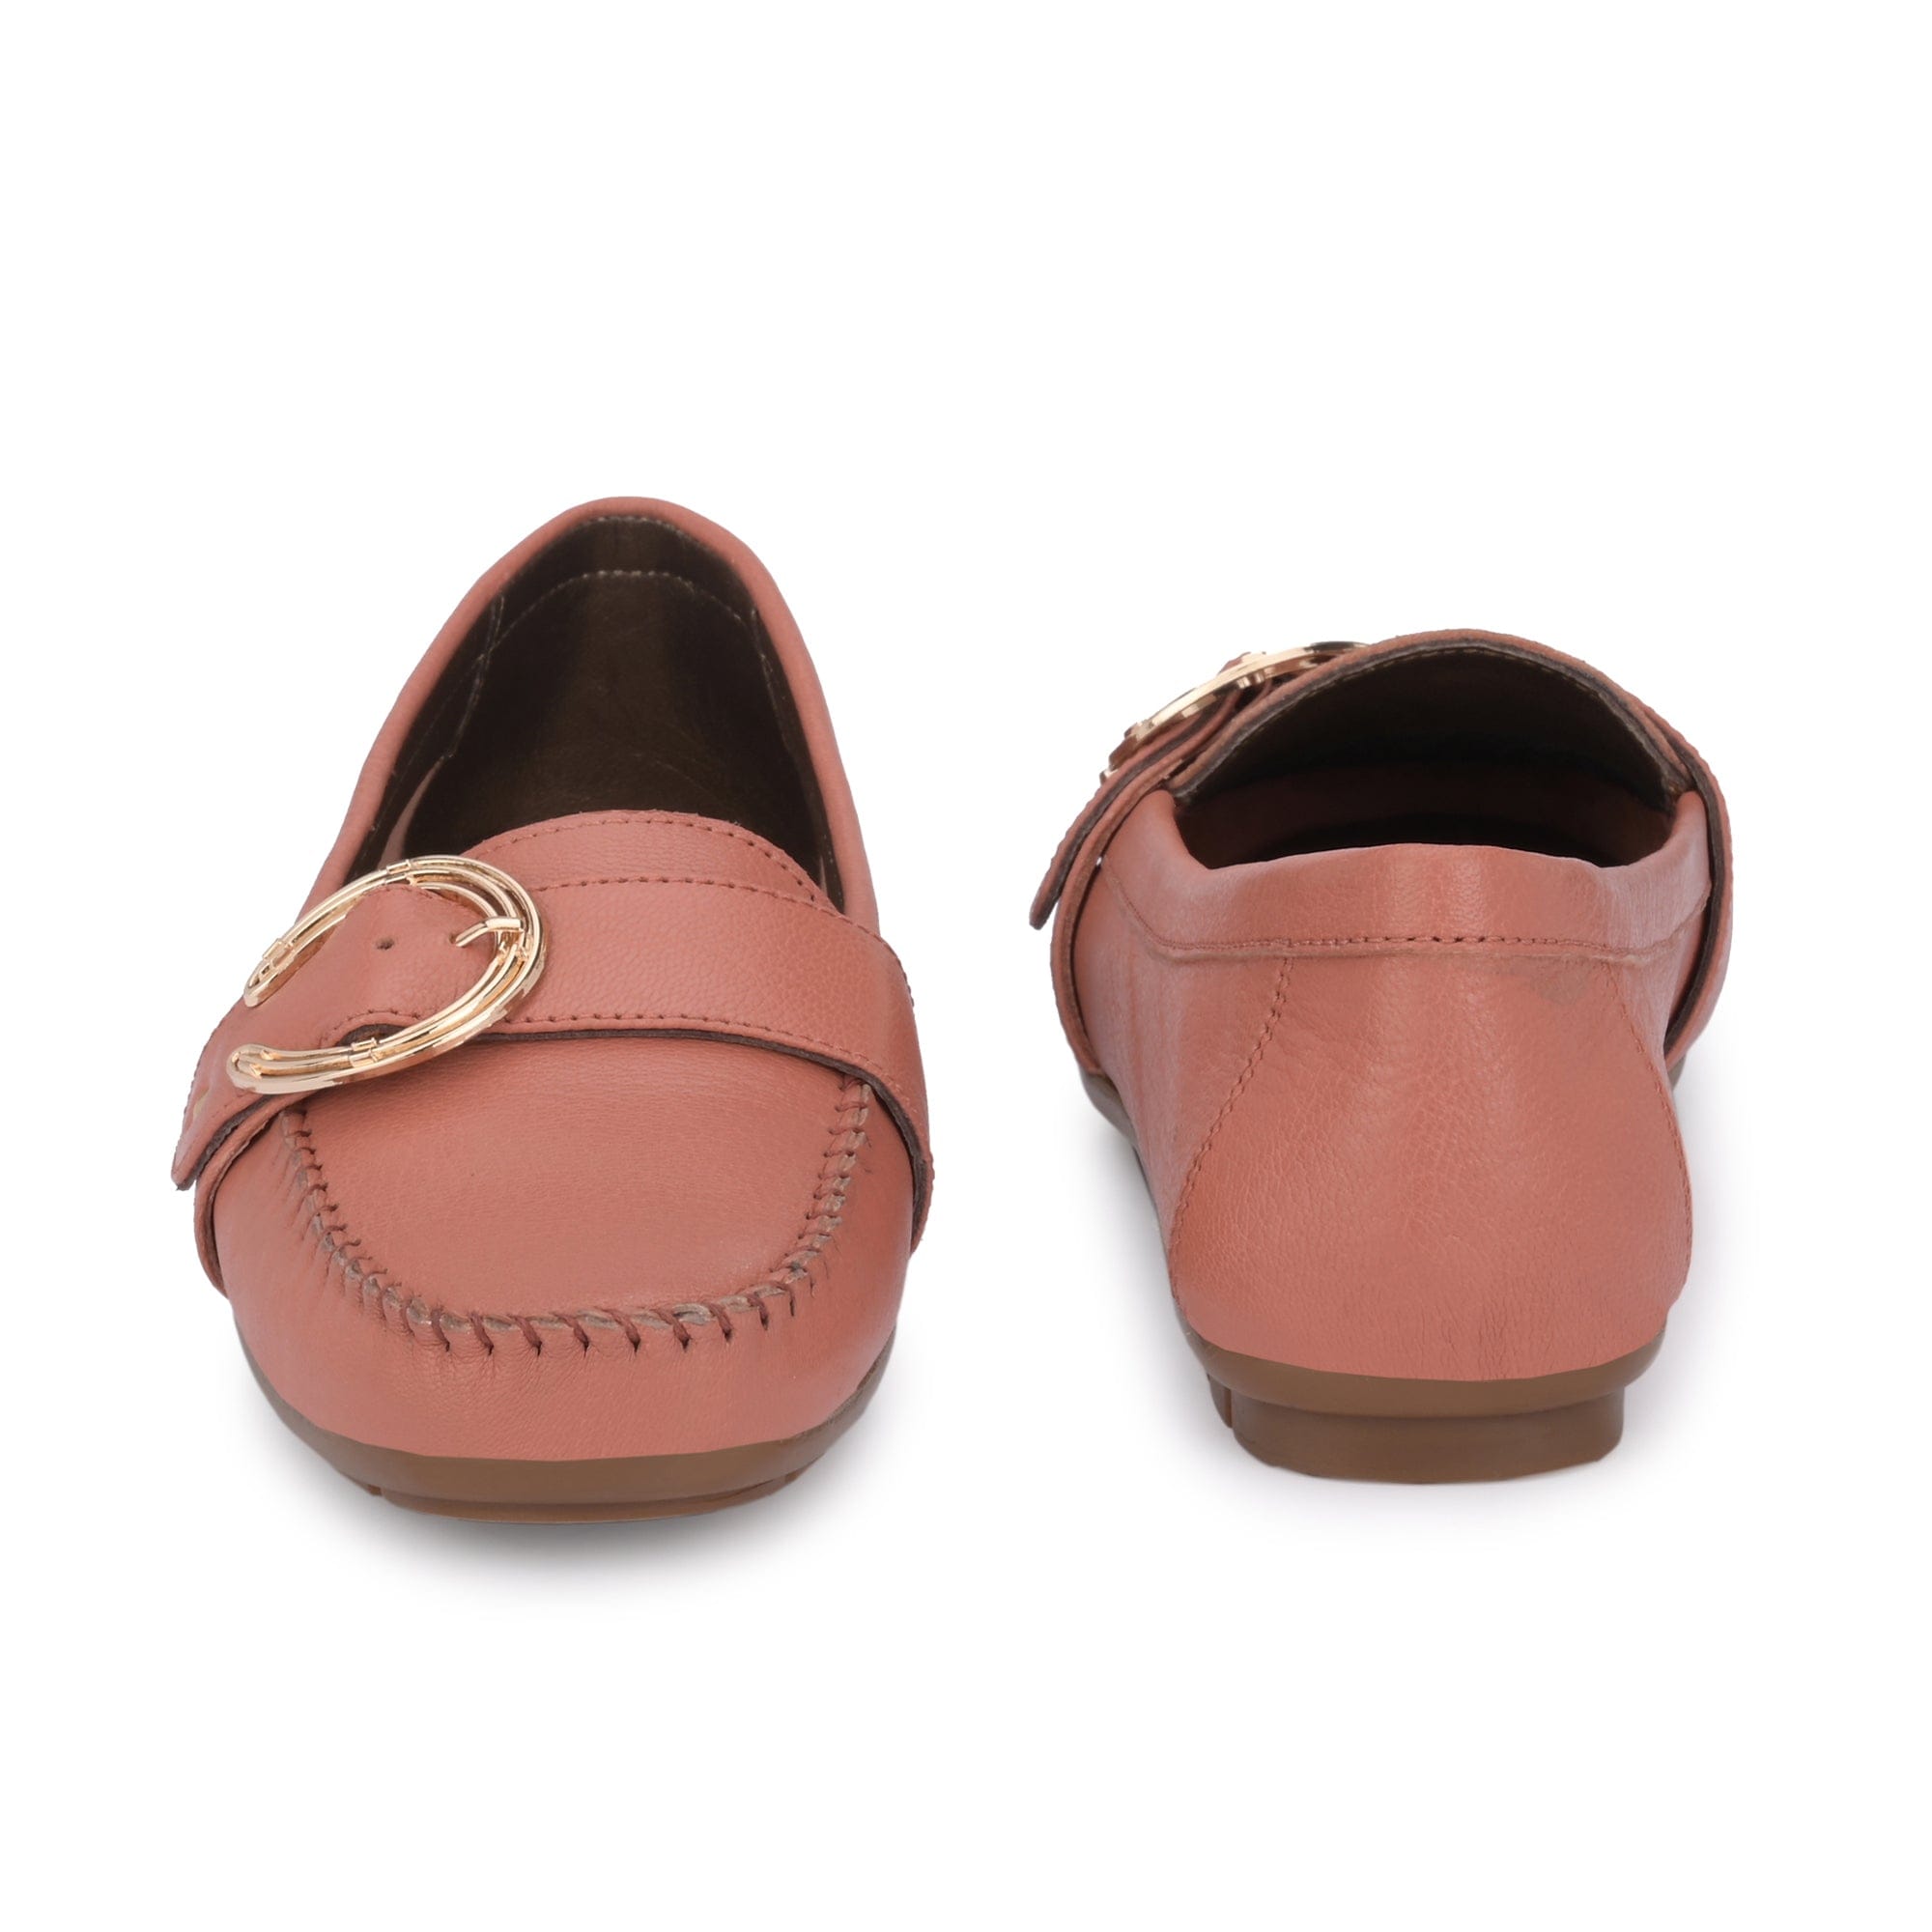 Buckled Casual Loafers For Women by Lady Boss egoss-shoes